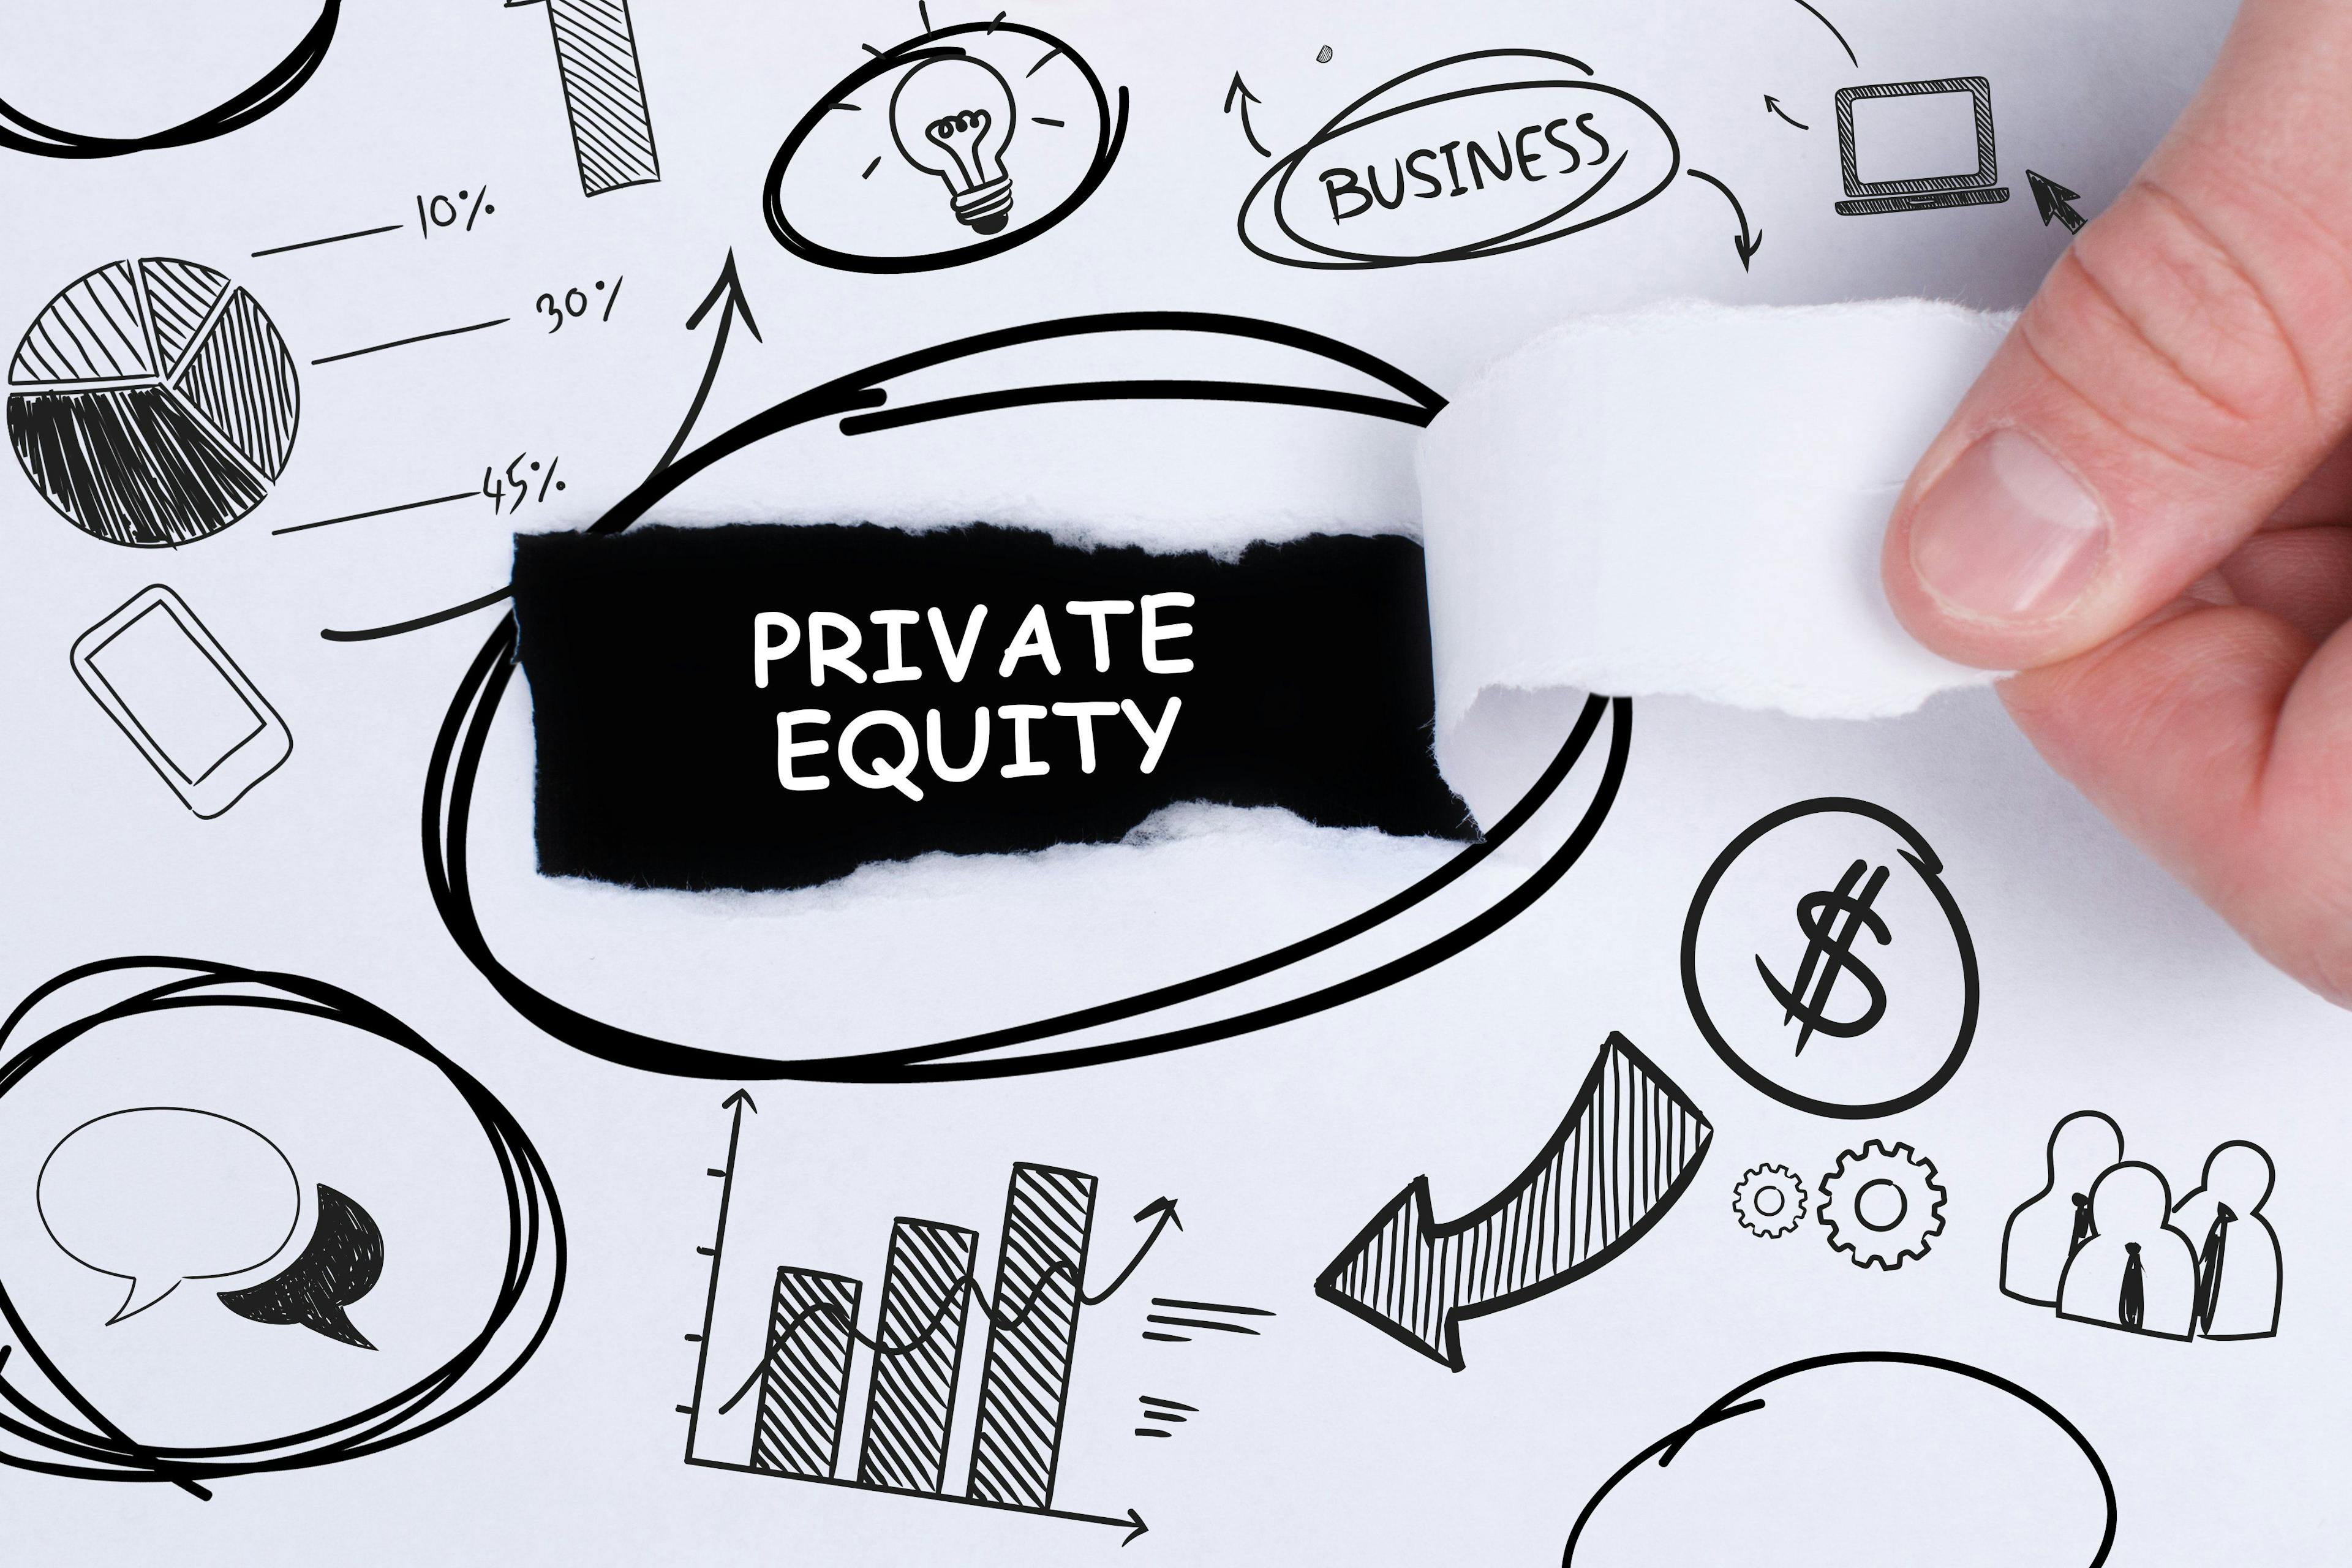 As private equity scrutiny Increases, physicians consider ESOPs as liquidity alternatives